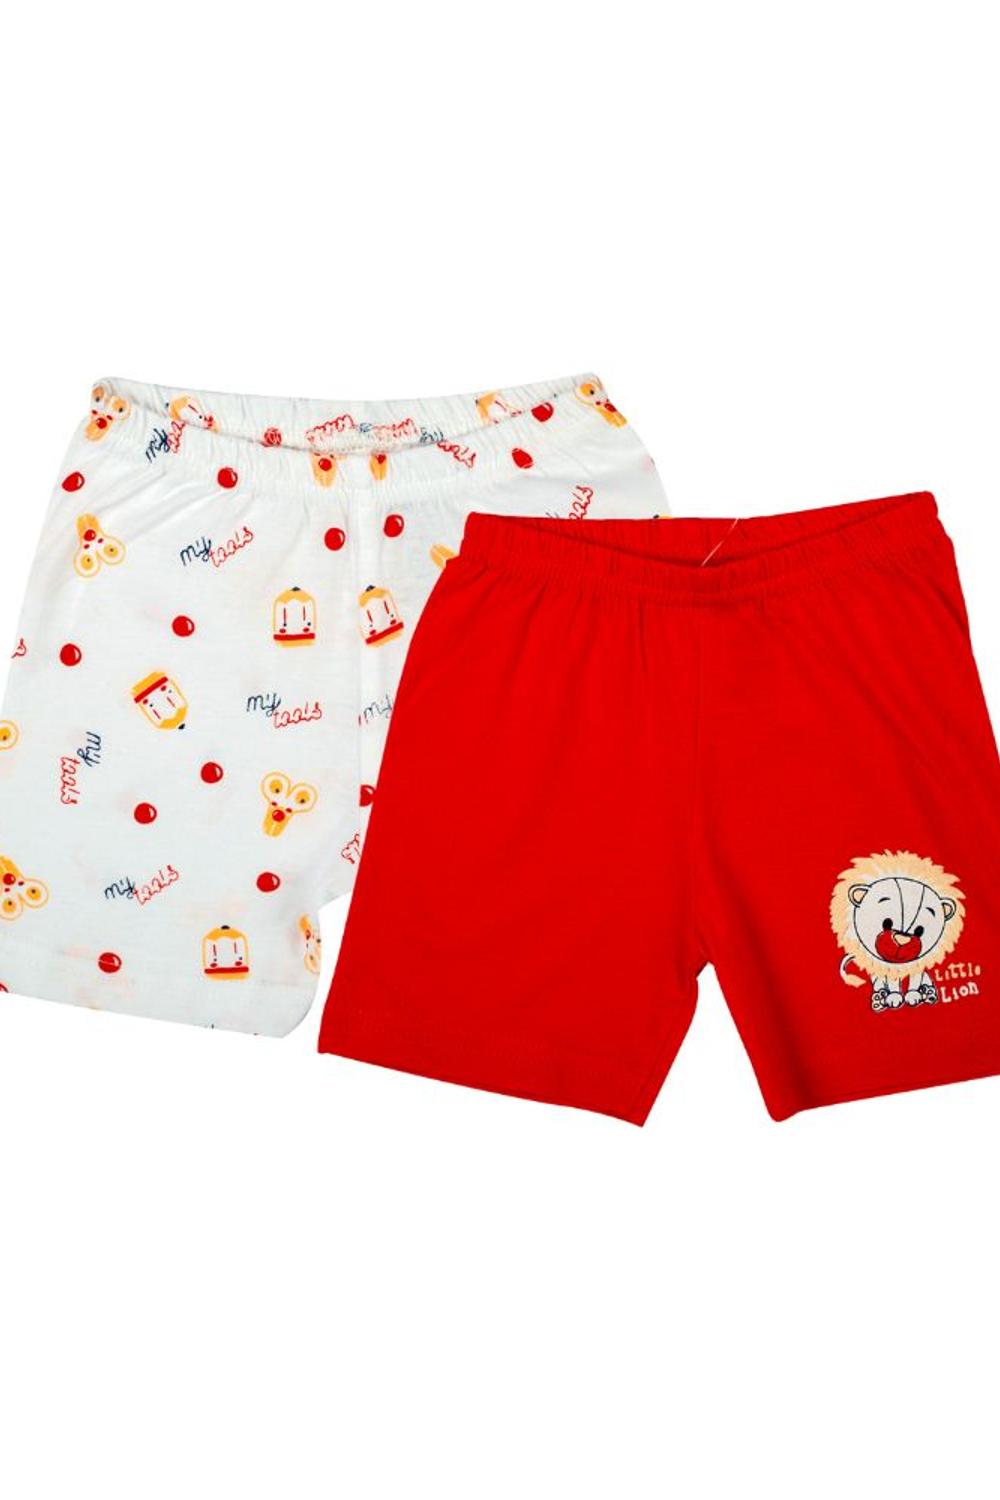 Mee Mee Shorts Pack Of 2 - Red &Amp White Printed